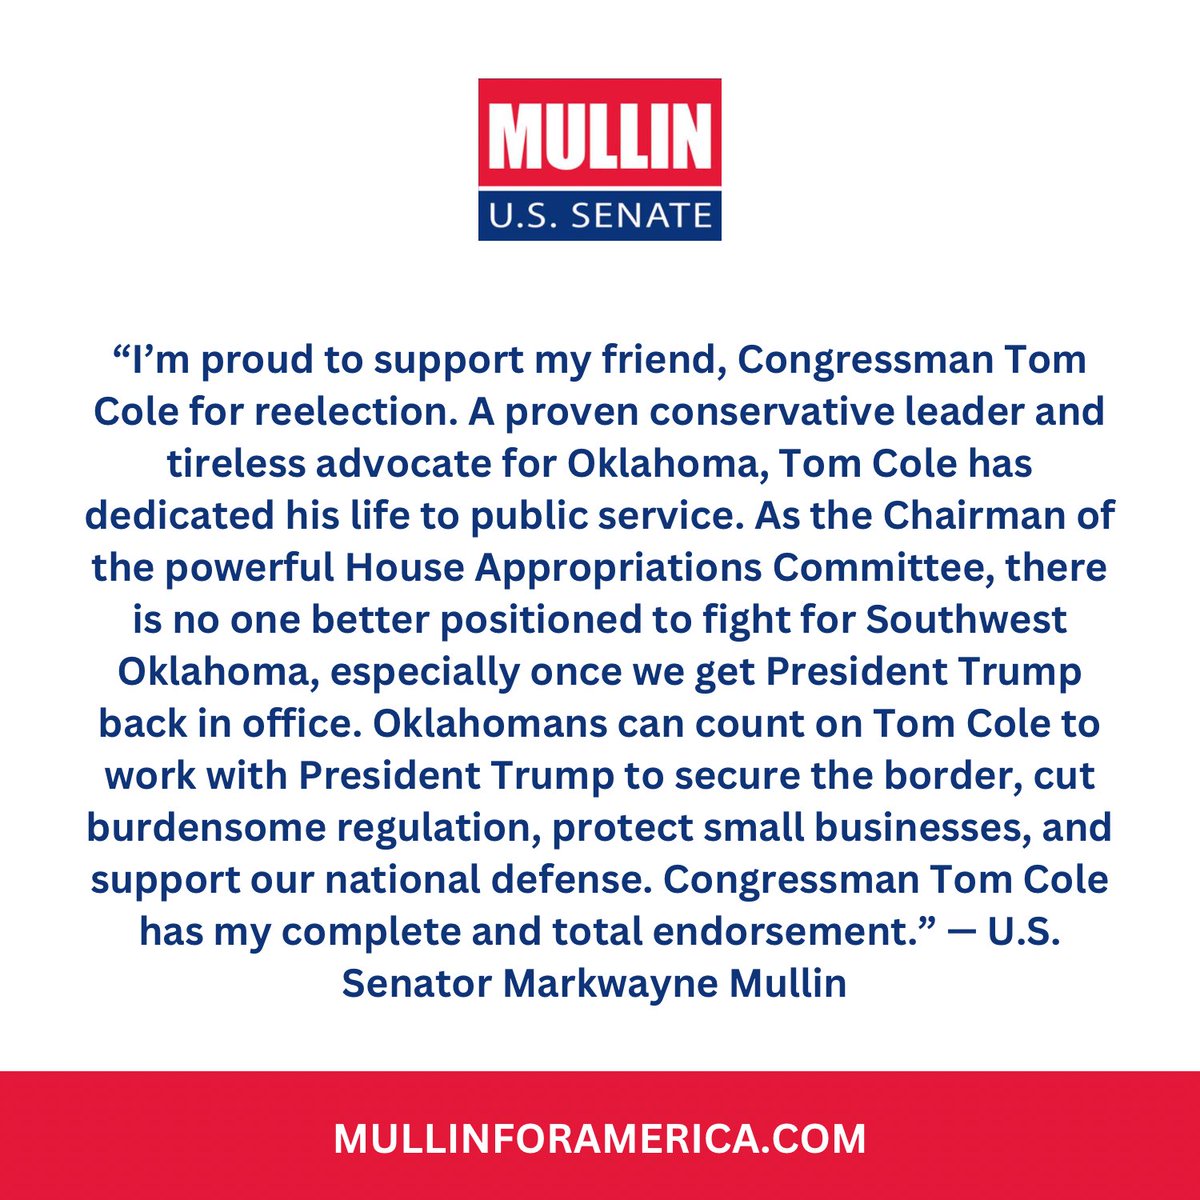 🚨ENDORSEMENT ALERT!🚨

I’m proud to support my friend, @TomColeOK04 for reelection.

Full statement: